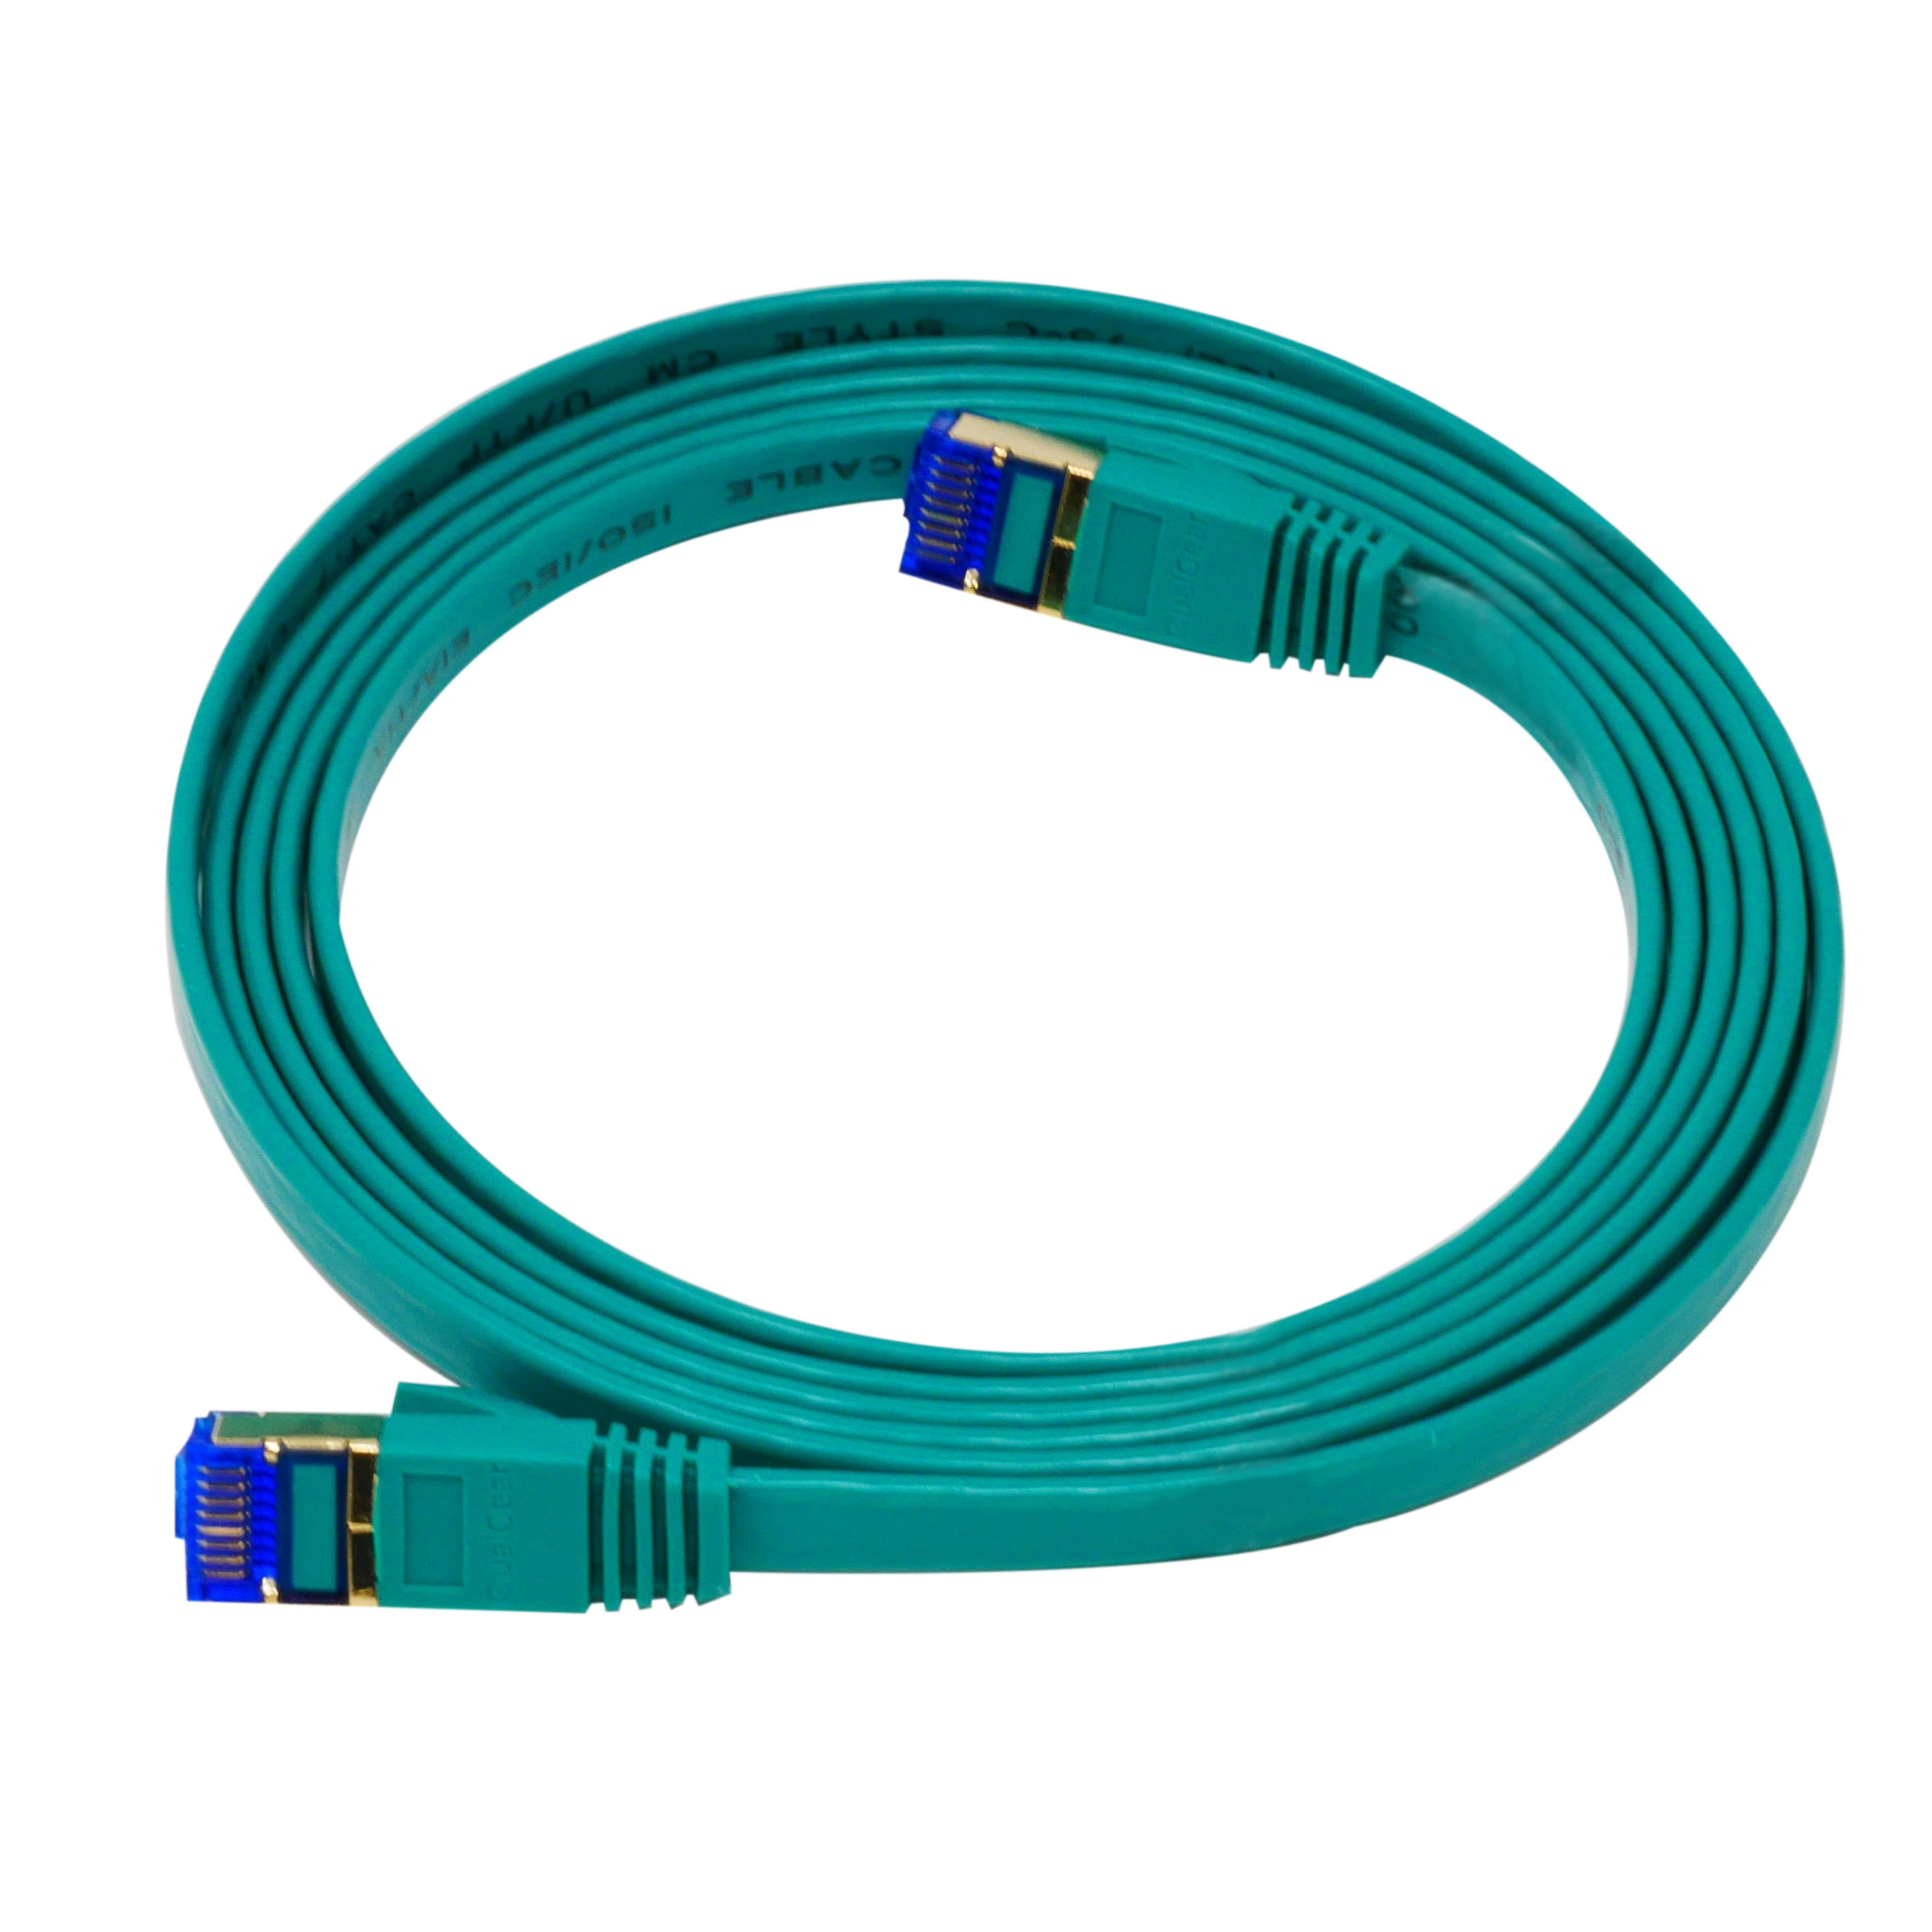 QualGear QG-CAT7F-6FT-GRN CAT 7 S/FTP Ethernet Cable Length 6 feet - 26 AWG, 10 Gbps, Gold Plated Contacts, RJ45, 99.99% OFC Copper, Color Green 